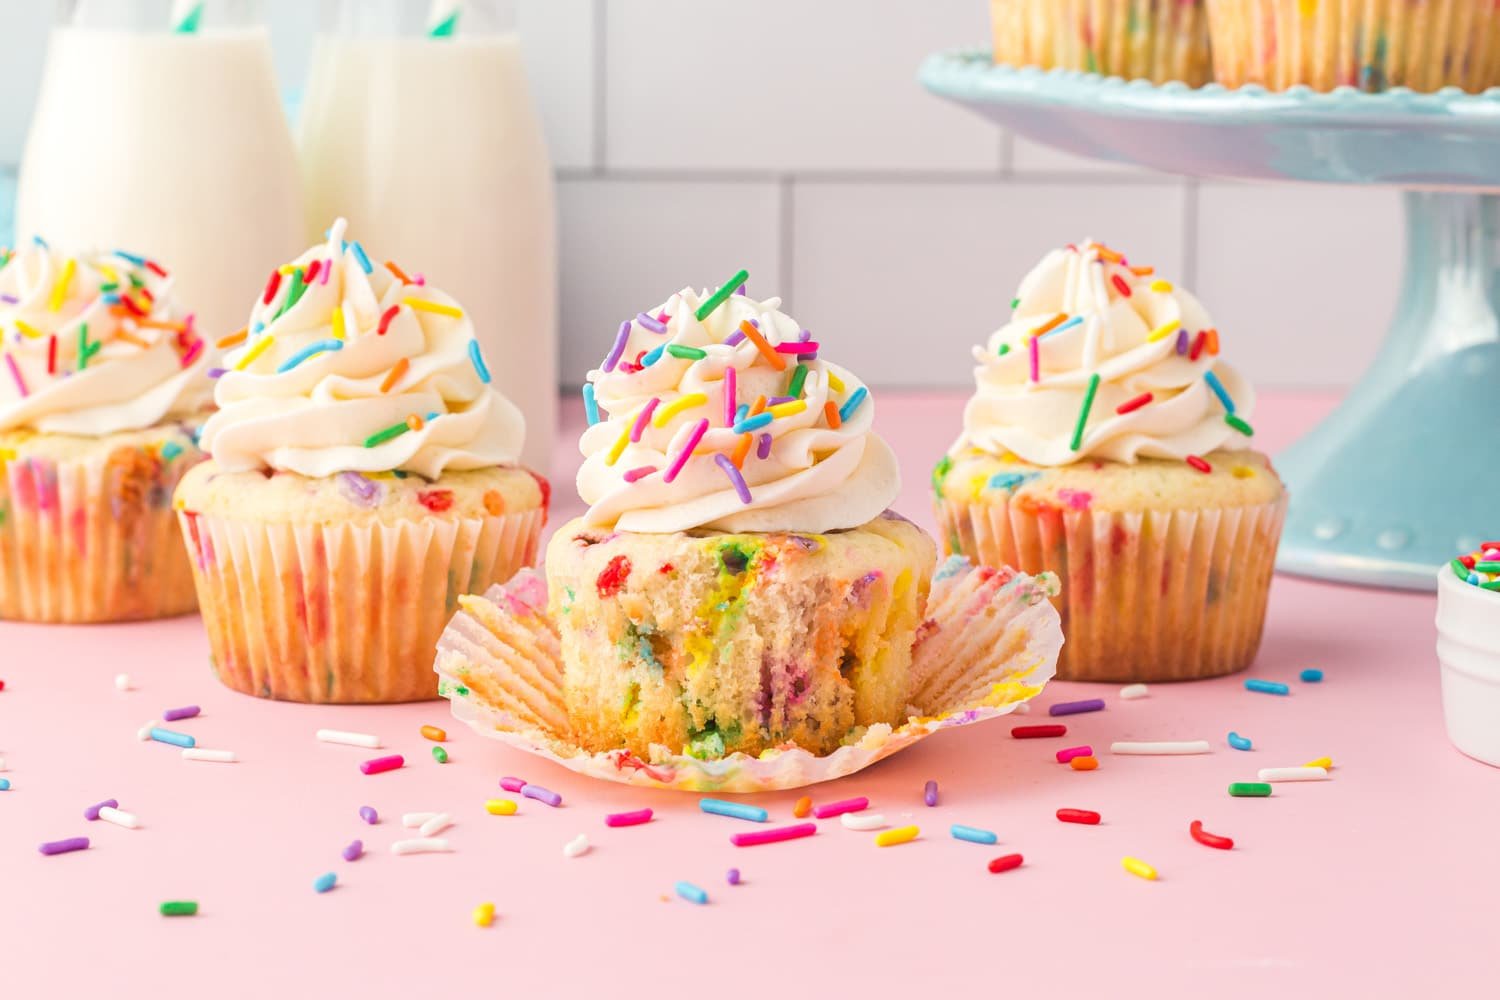 Unwrapping a Funfetti cupcakes recipe cake on pink background with sprinkles